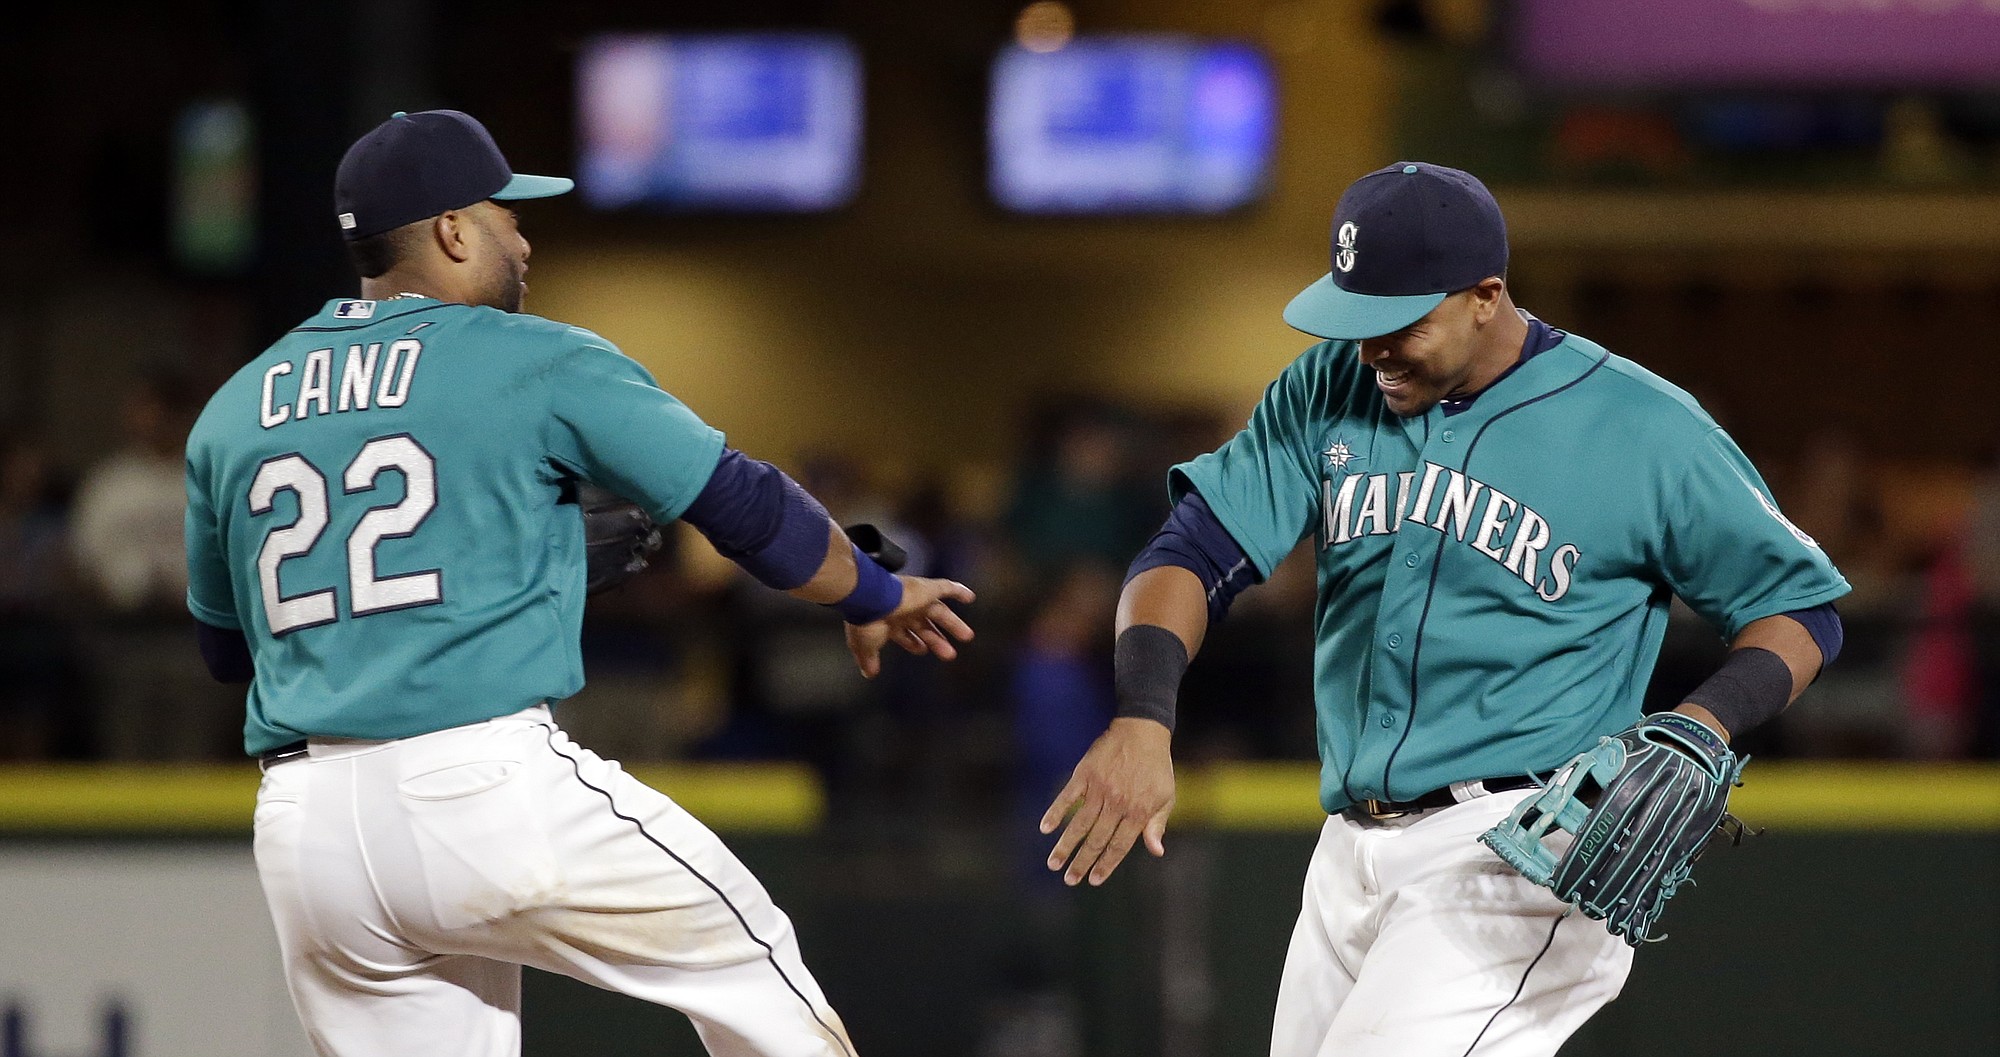 Seattle Mariners Robinson Cano (22) and Nelson Cruz share congratulations after the Mariners defeated the Texas Rangers 4-3 in a baseball game Friday, Aug. 7, 2015, in Seattle.